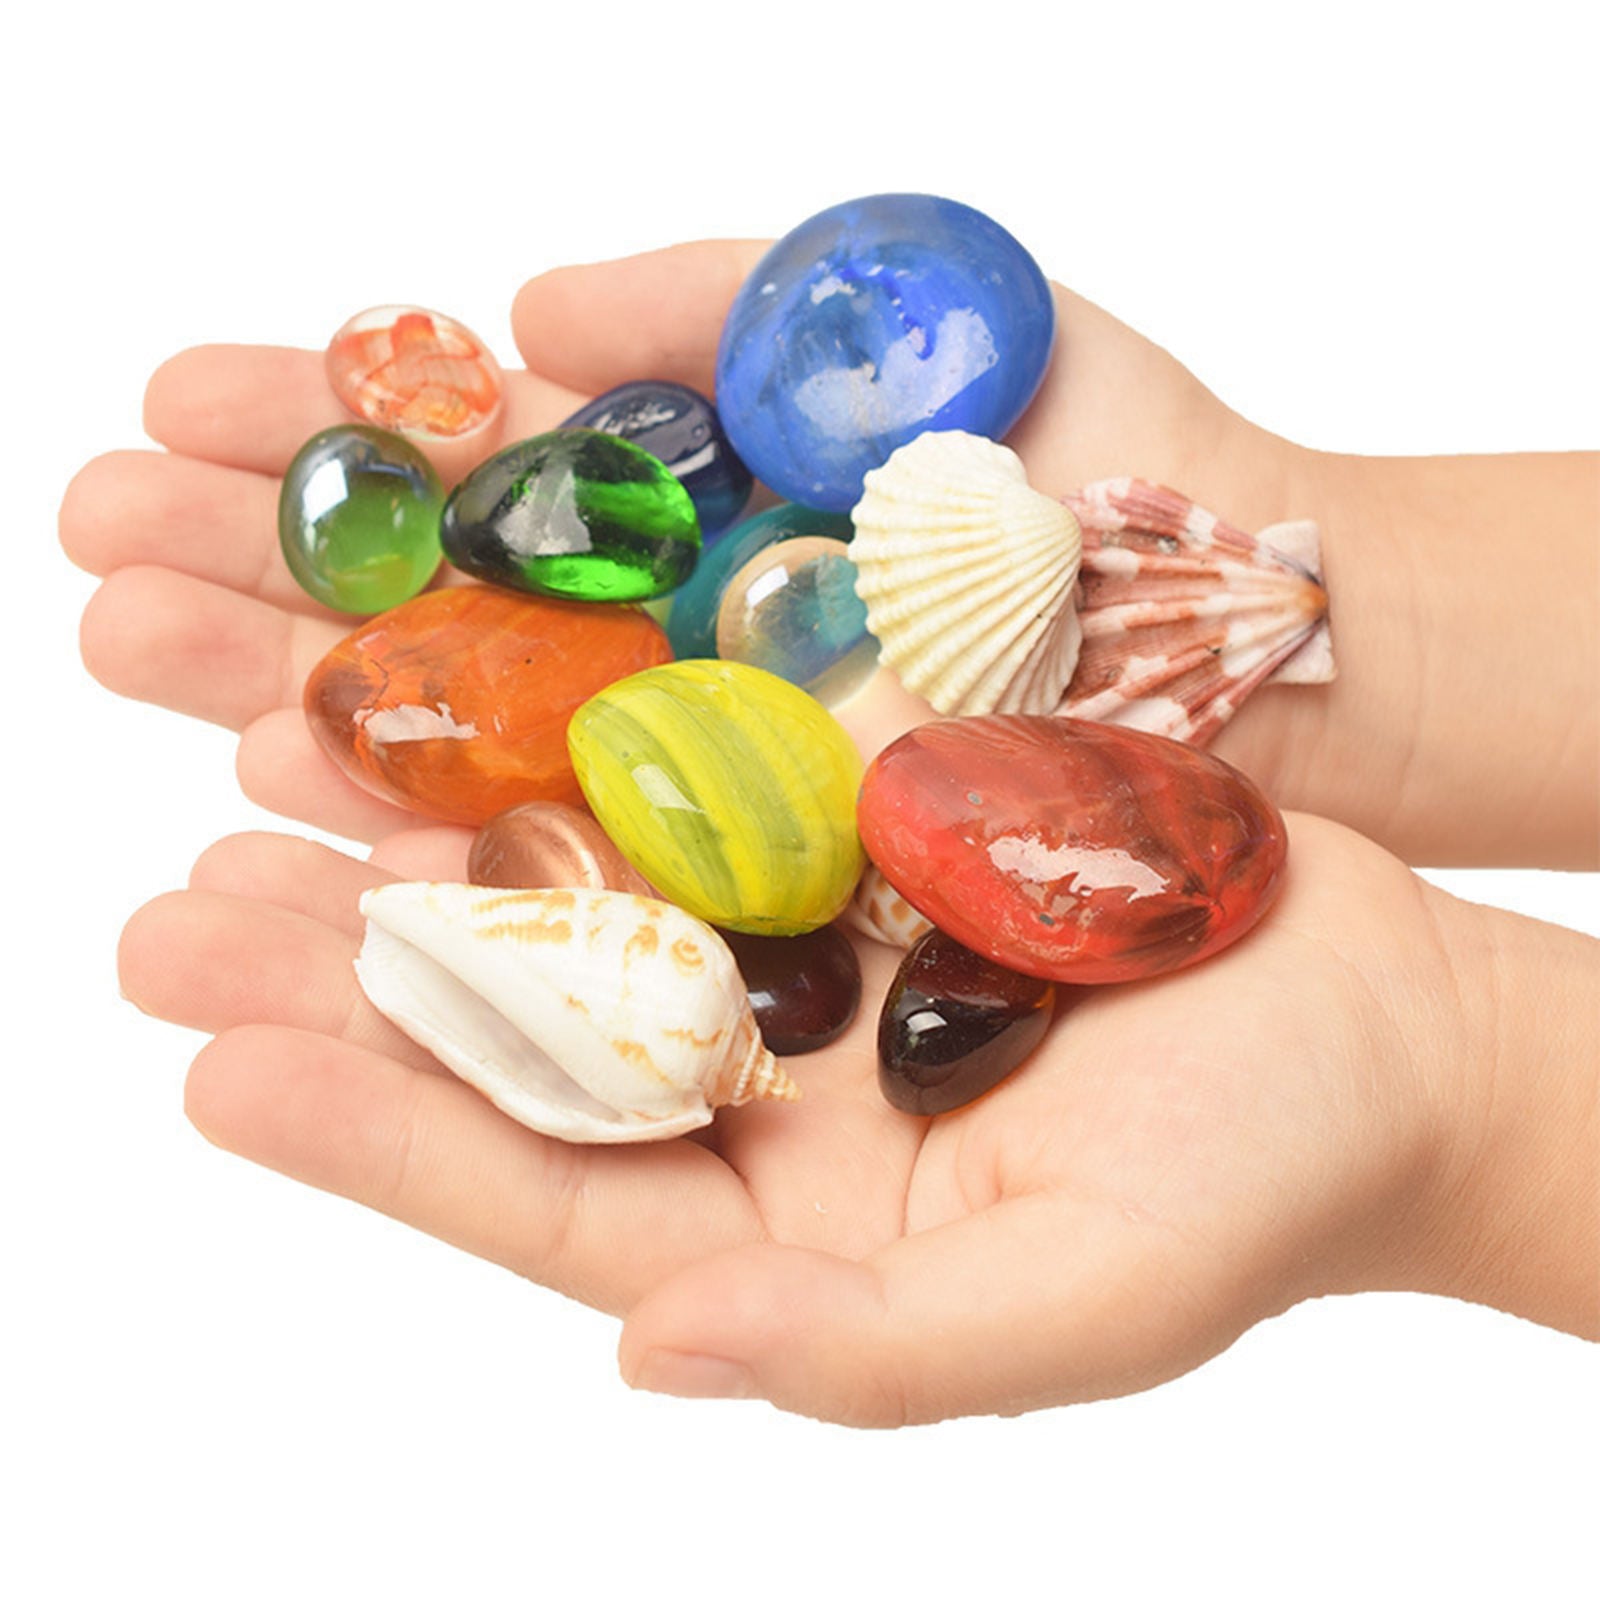 Jewel Digging Kits with 17 Simulation Gemstones for Kids Rock Collection Science